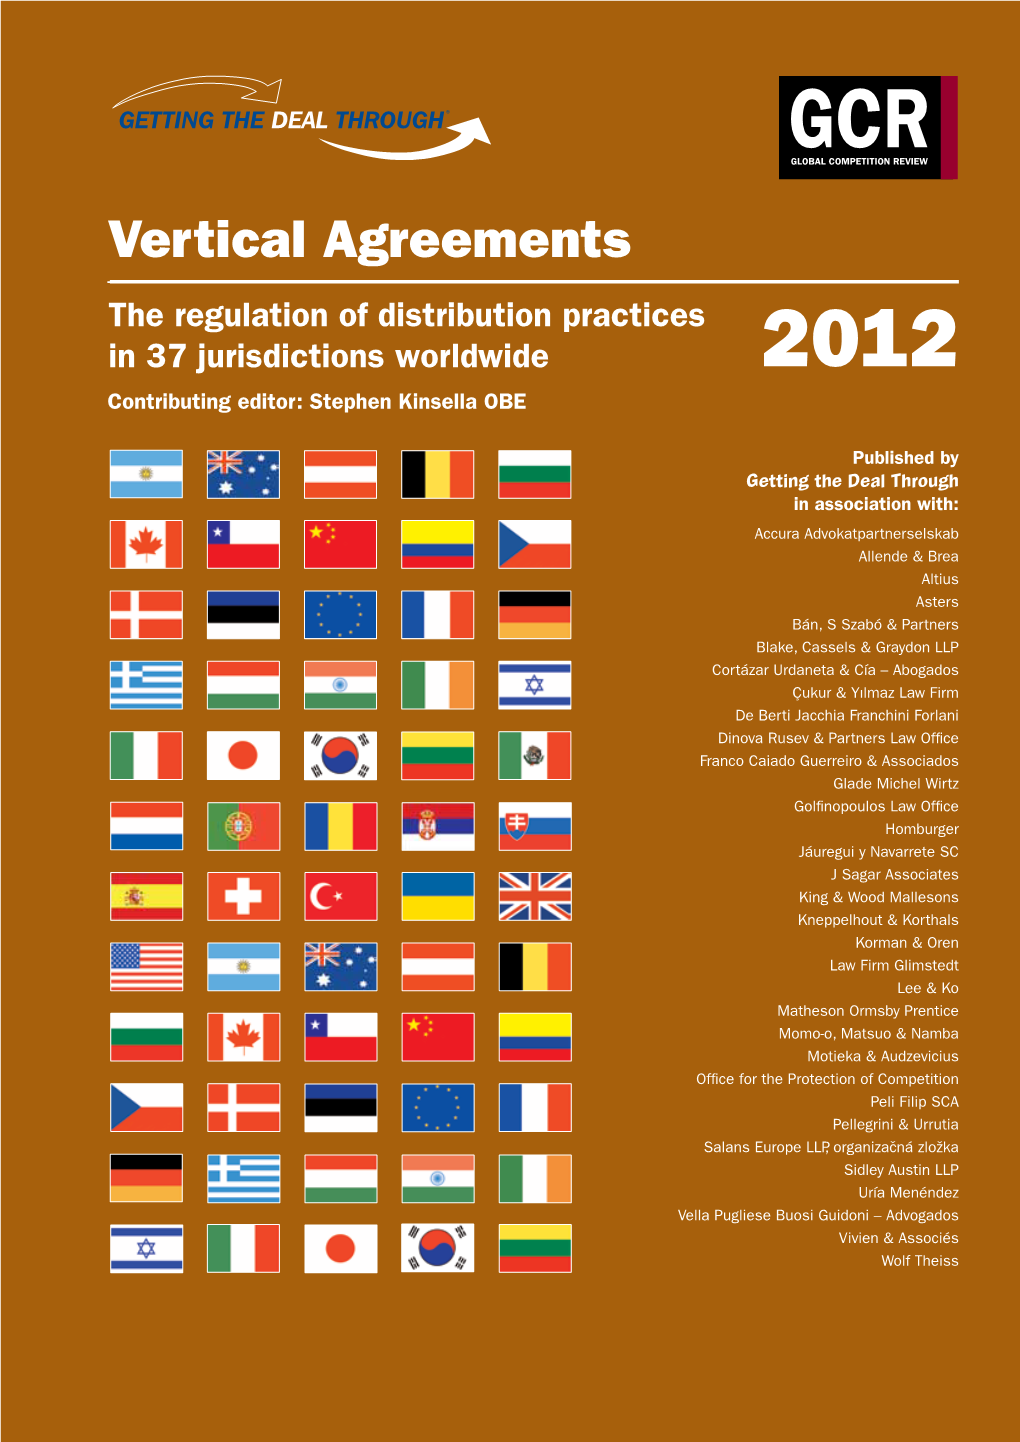 Vertical Agreements the Regulation of Distribution Practices in 37 Jurisdictions Worldwide 2012 Contributing Editor: Stephen Kinsella OBE